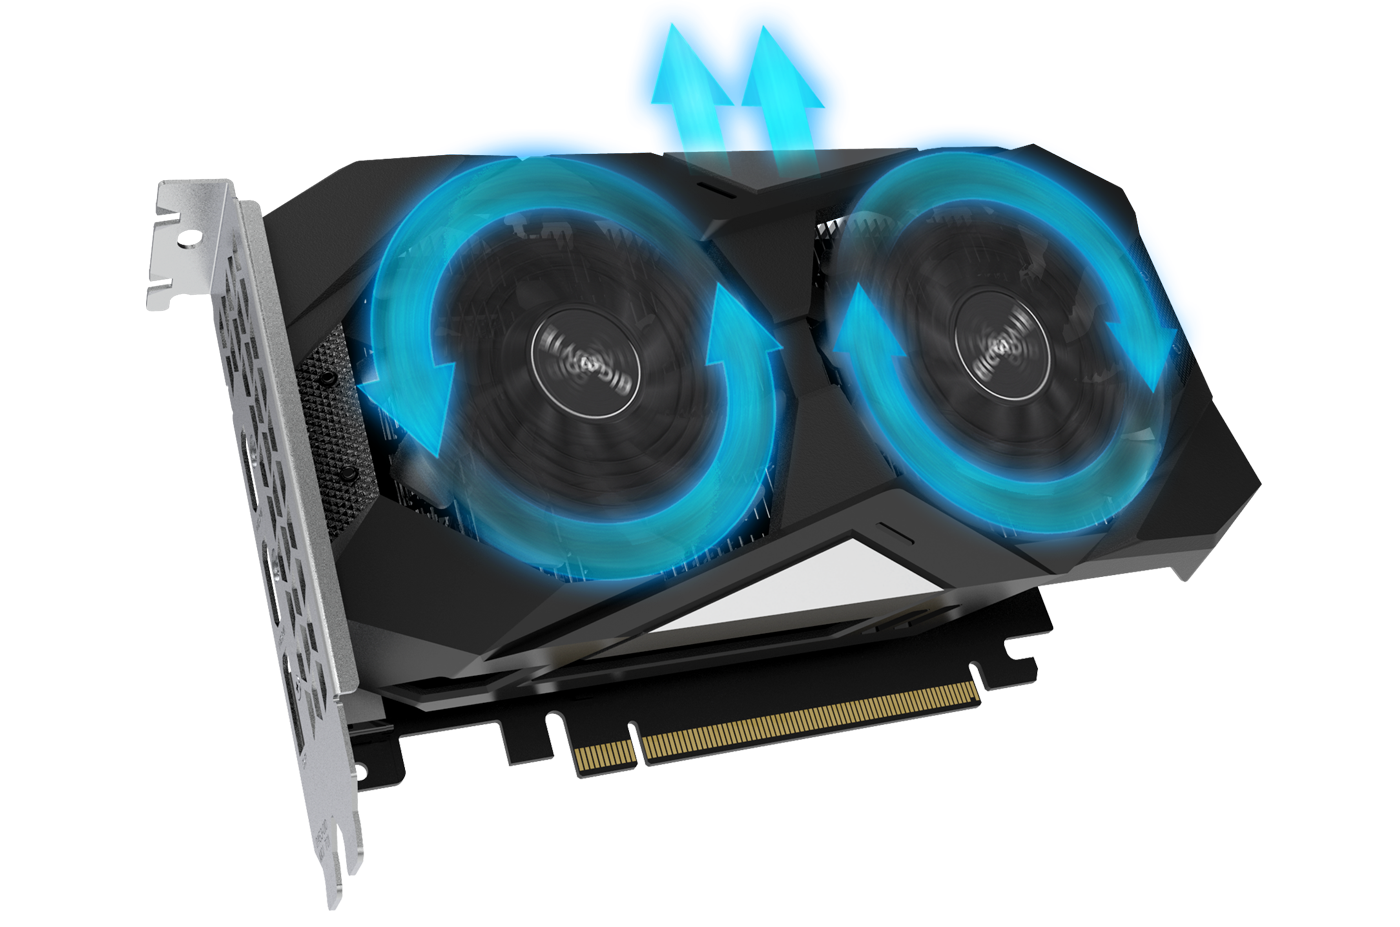 GIGABYTE GV-N1650OC-4GD graphics card angled up to the right with blue graphics showing the airflow its spinning fans create